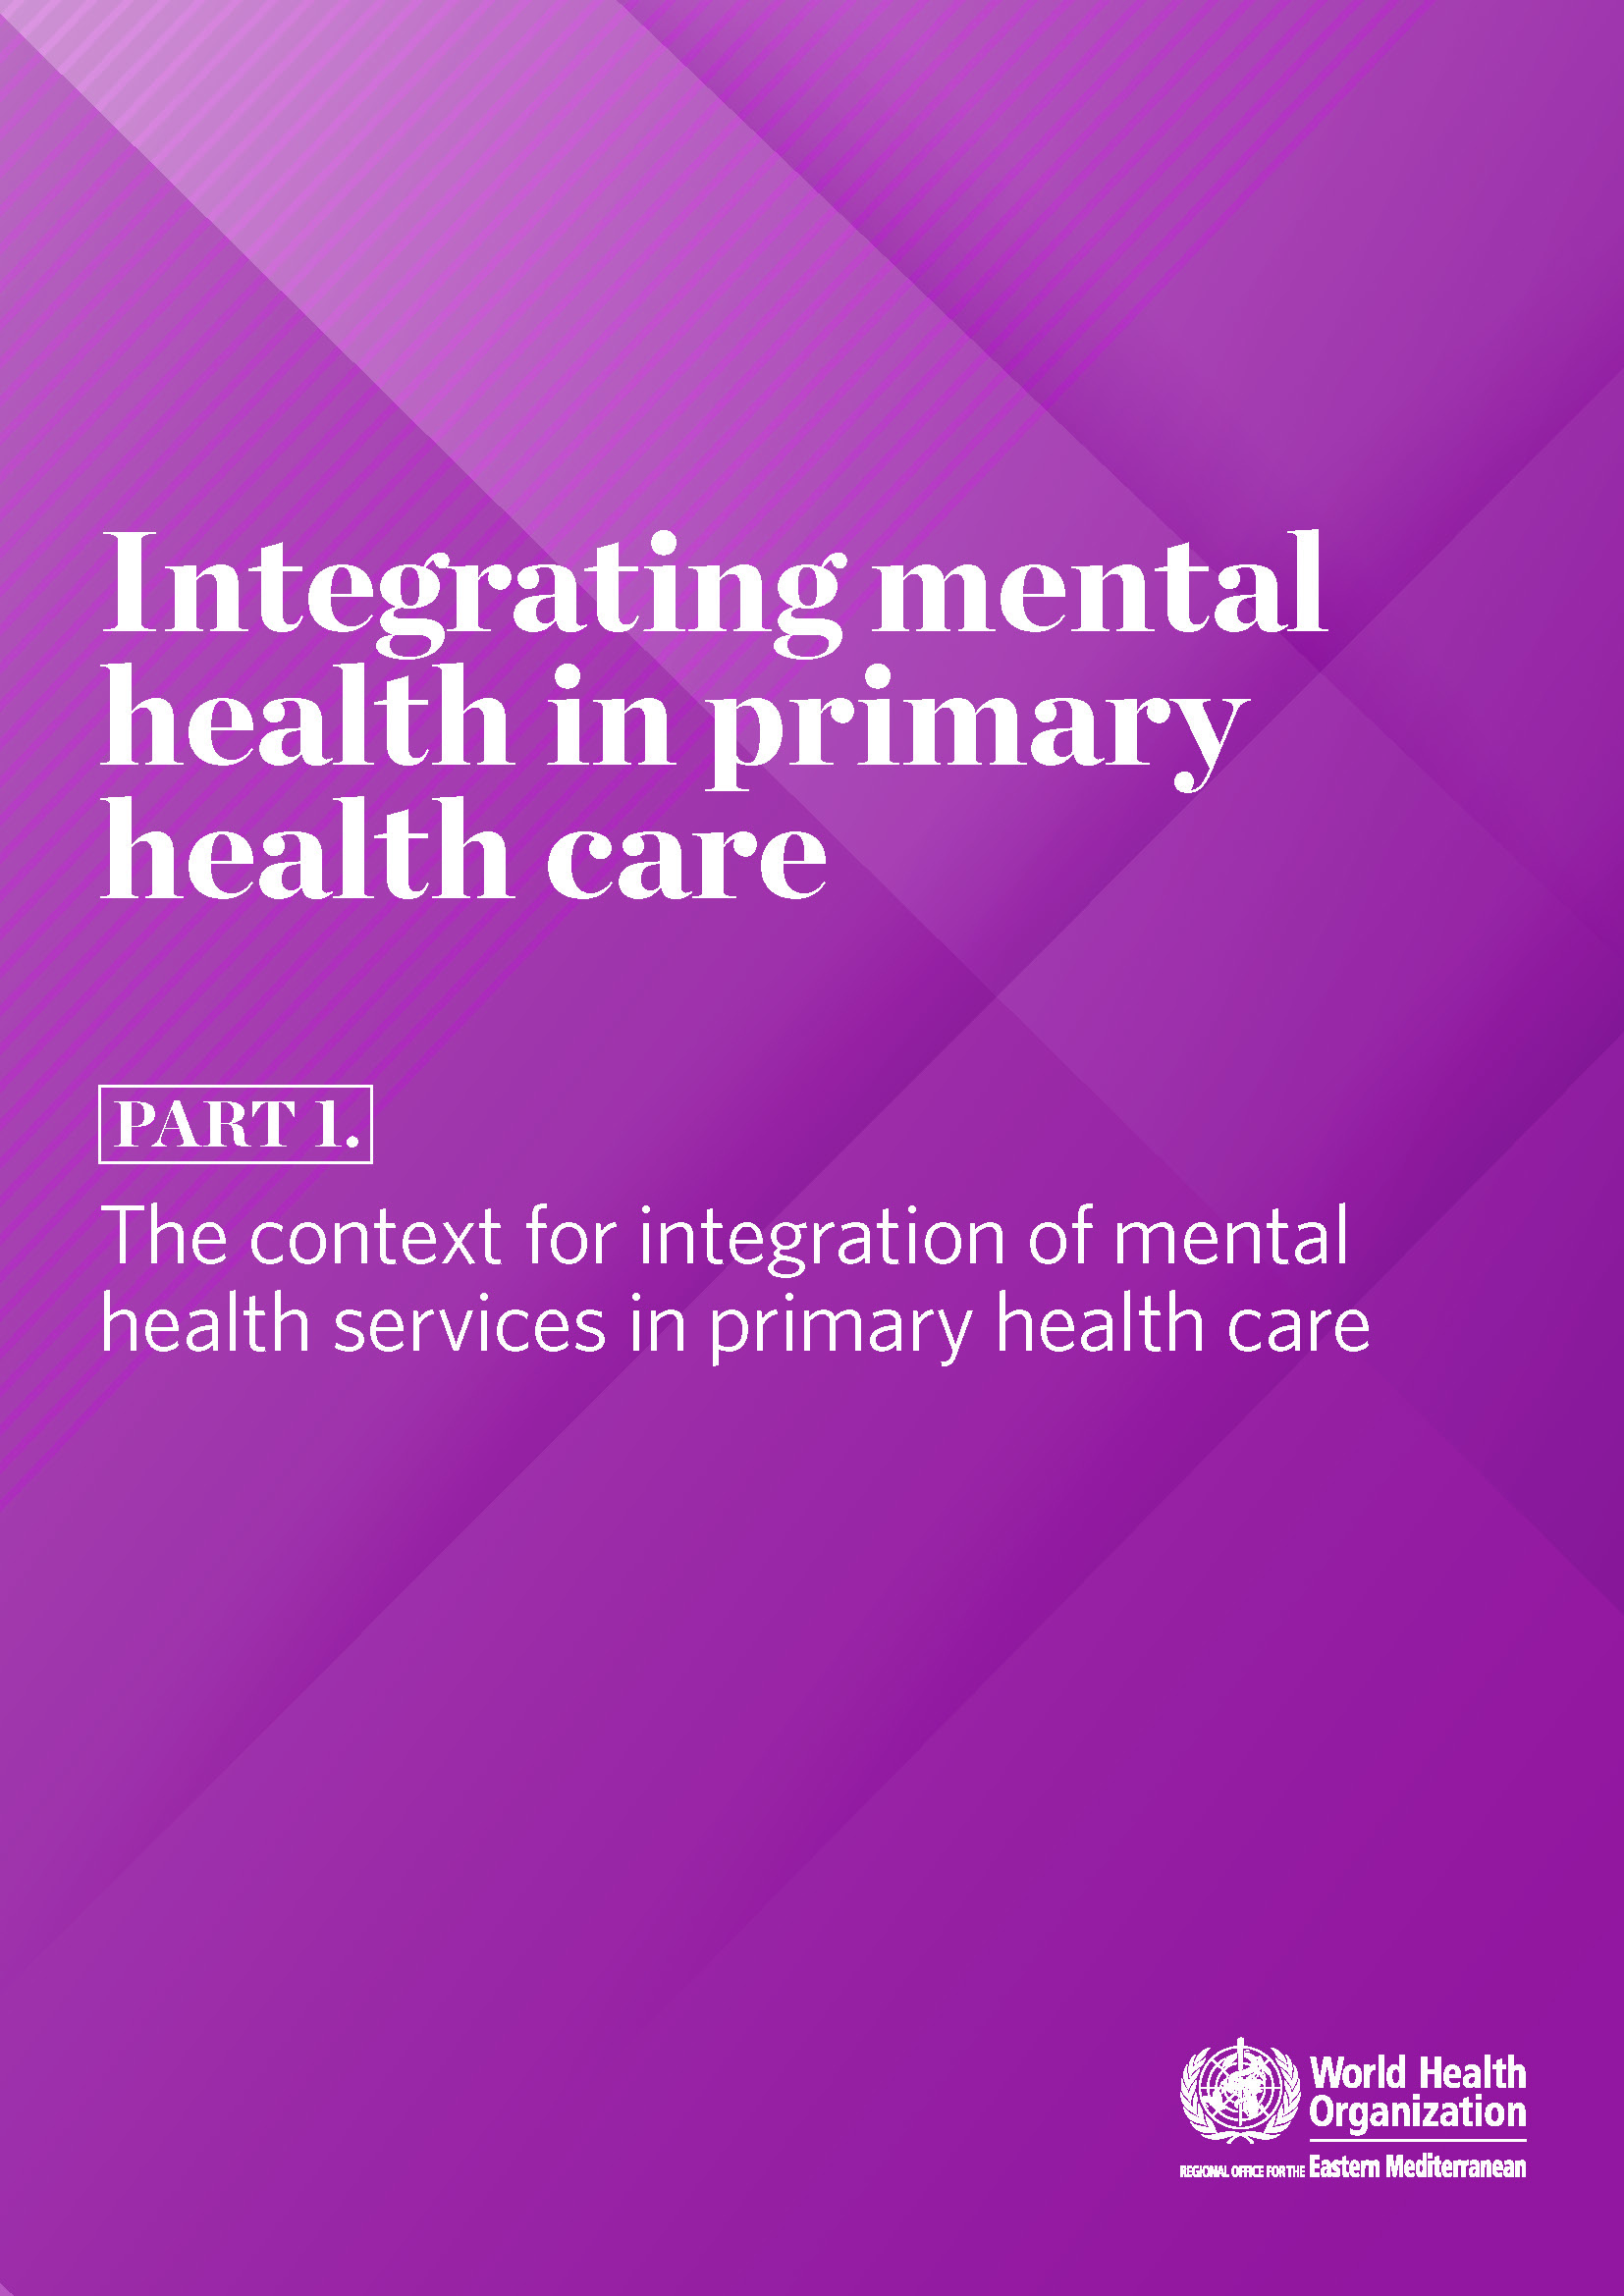 Integrating mental health in primary health care: part 1. the context for integration of mental health services in primary health care